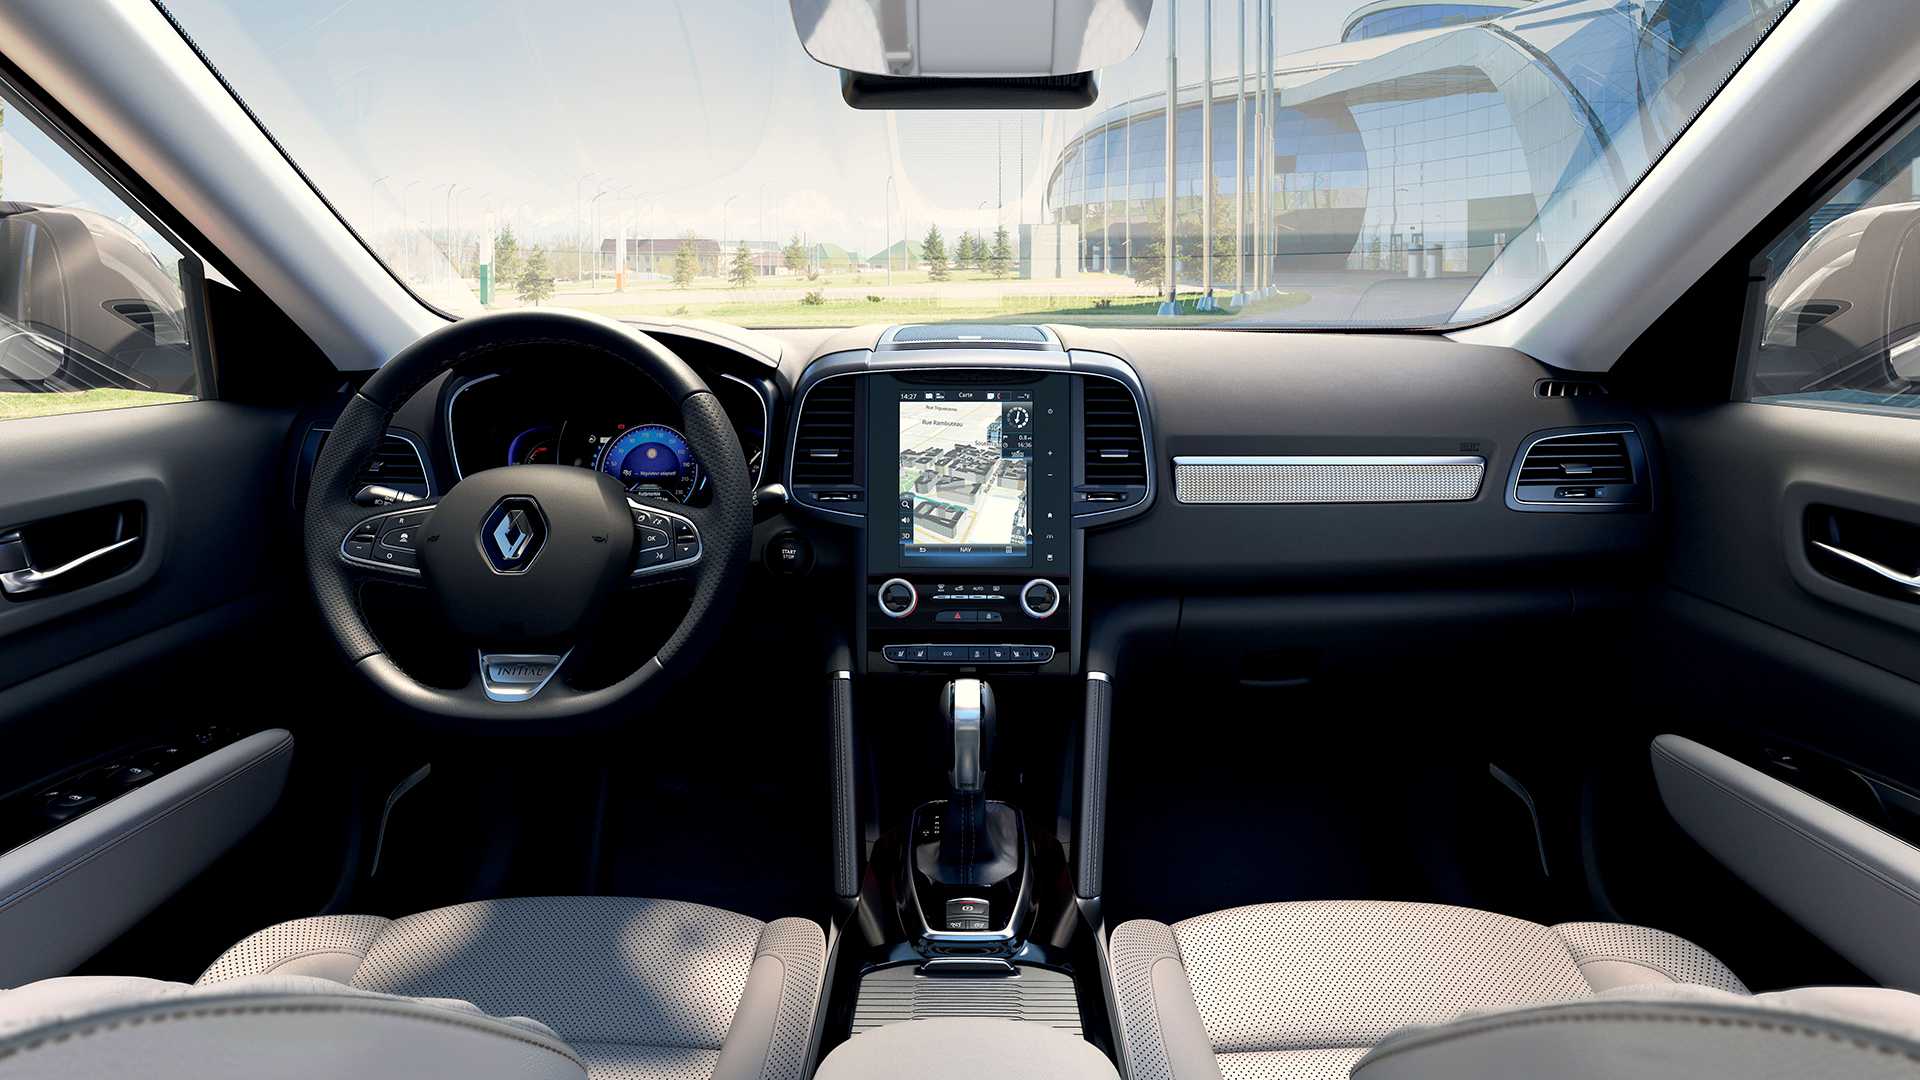 Renault Koleos a brand new compact crossover SUV providing style, comfort, and innovation all in one package. Completely robust surplasing expectations